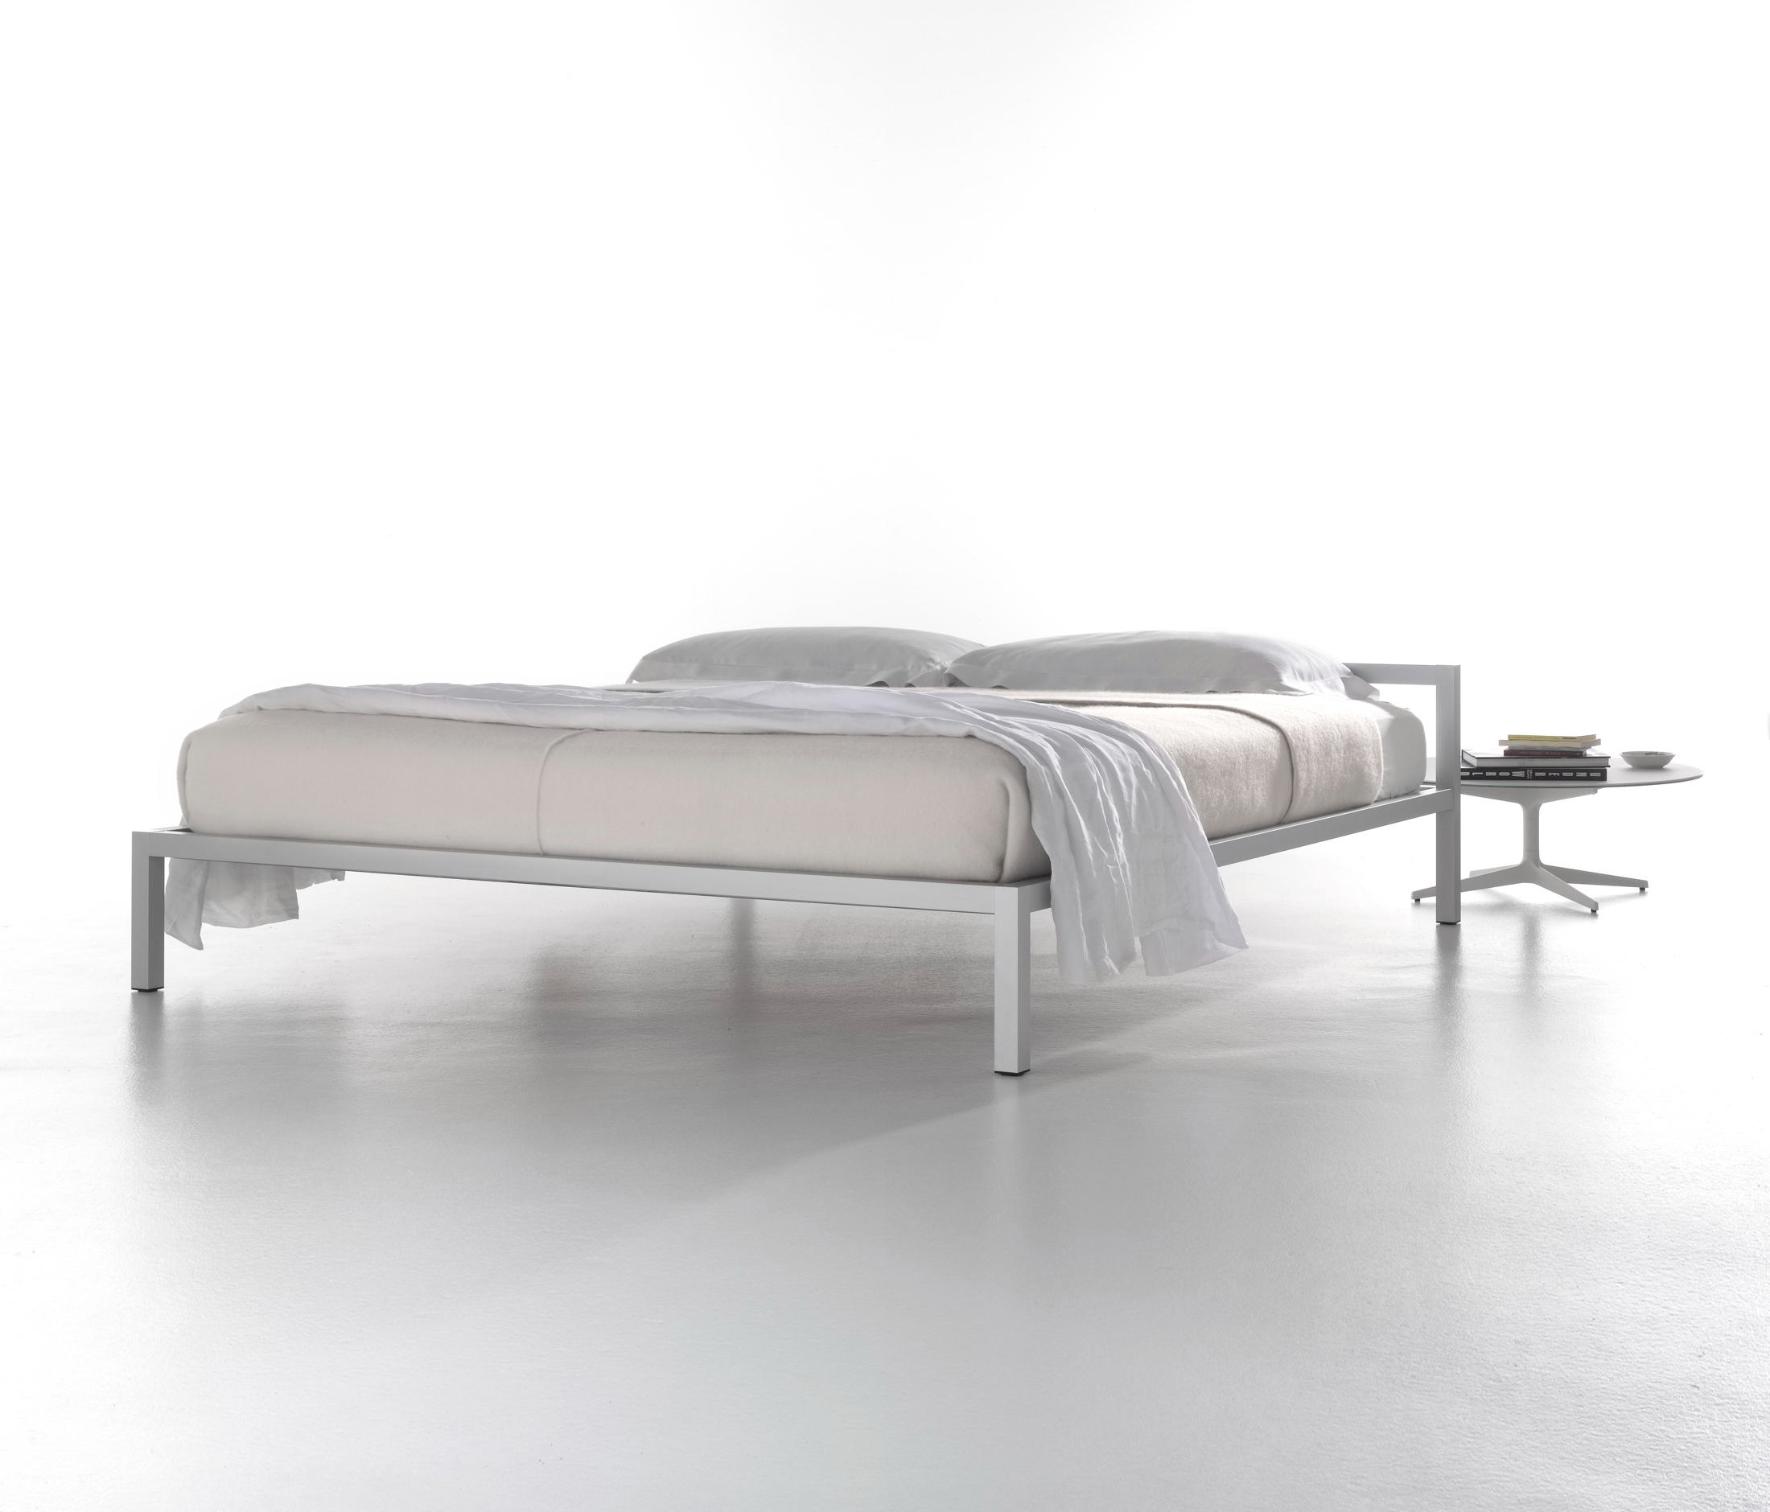 Aluminium Bed with Italian Precision ☞ Structure: Gloss Painted White X060 ☞ Dimensions: 180 x 210 cm